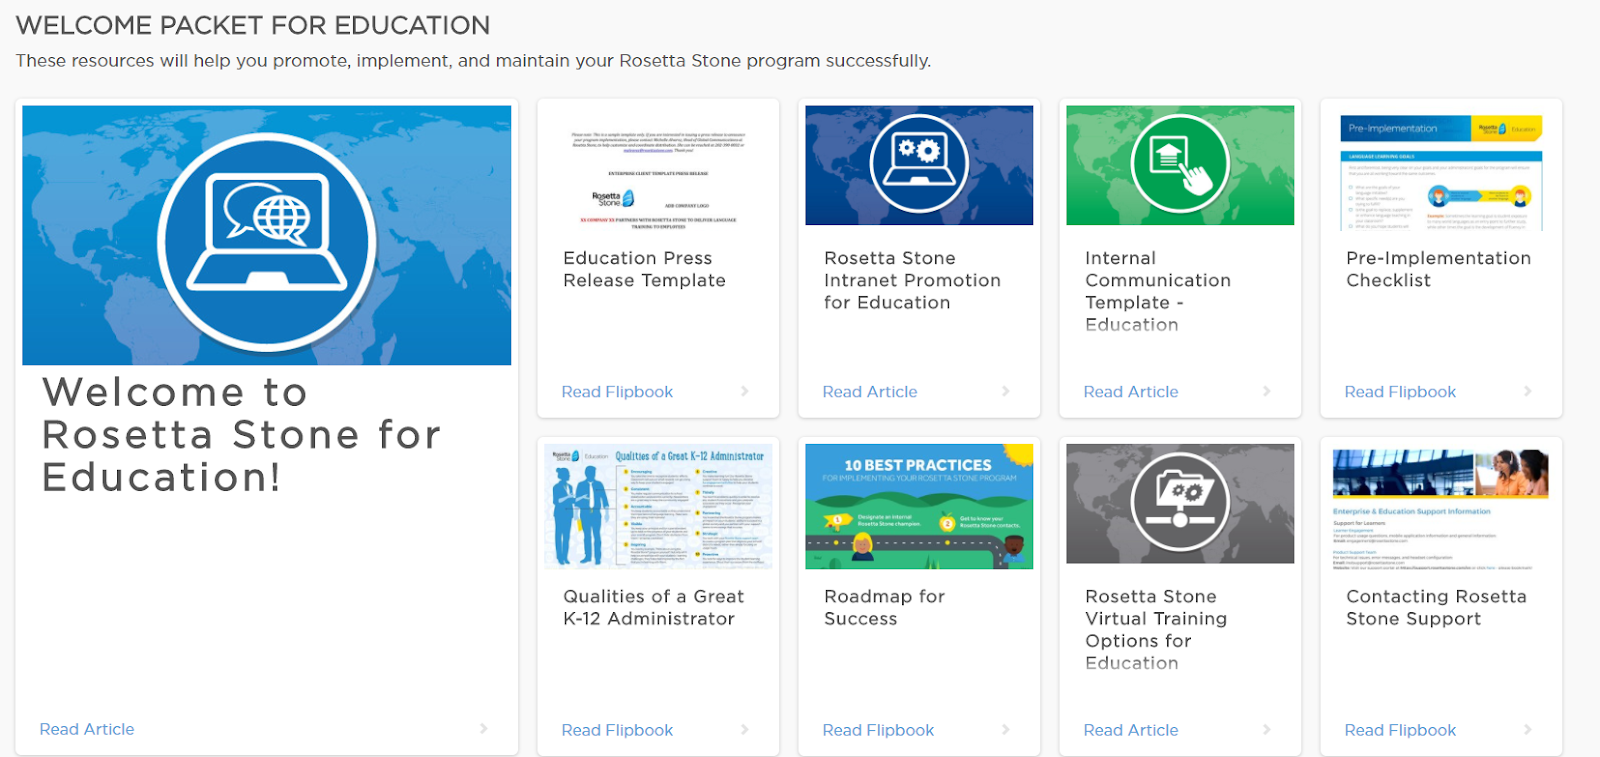 Screenshot of Rosetta Stone's welcome packet for advocates that features links to different educational content.